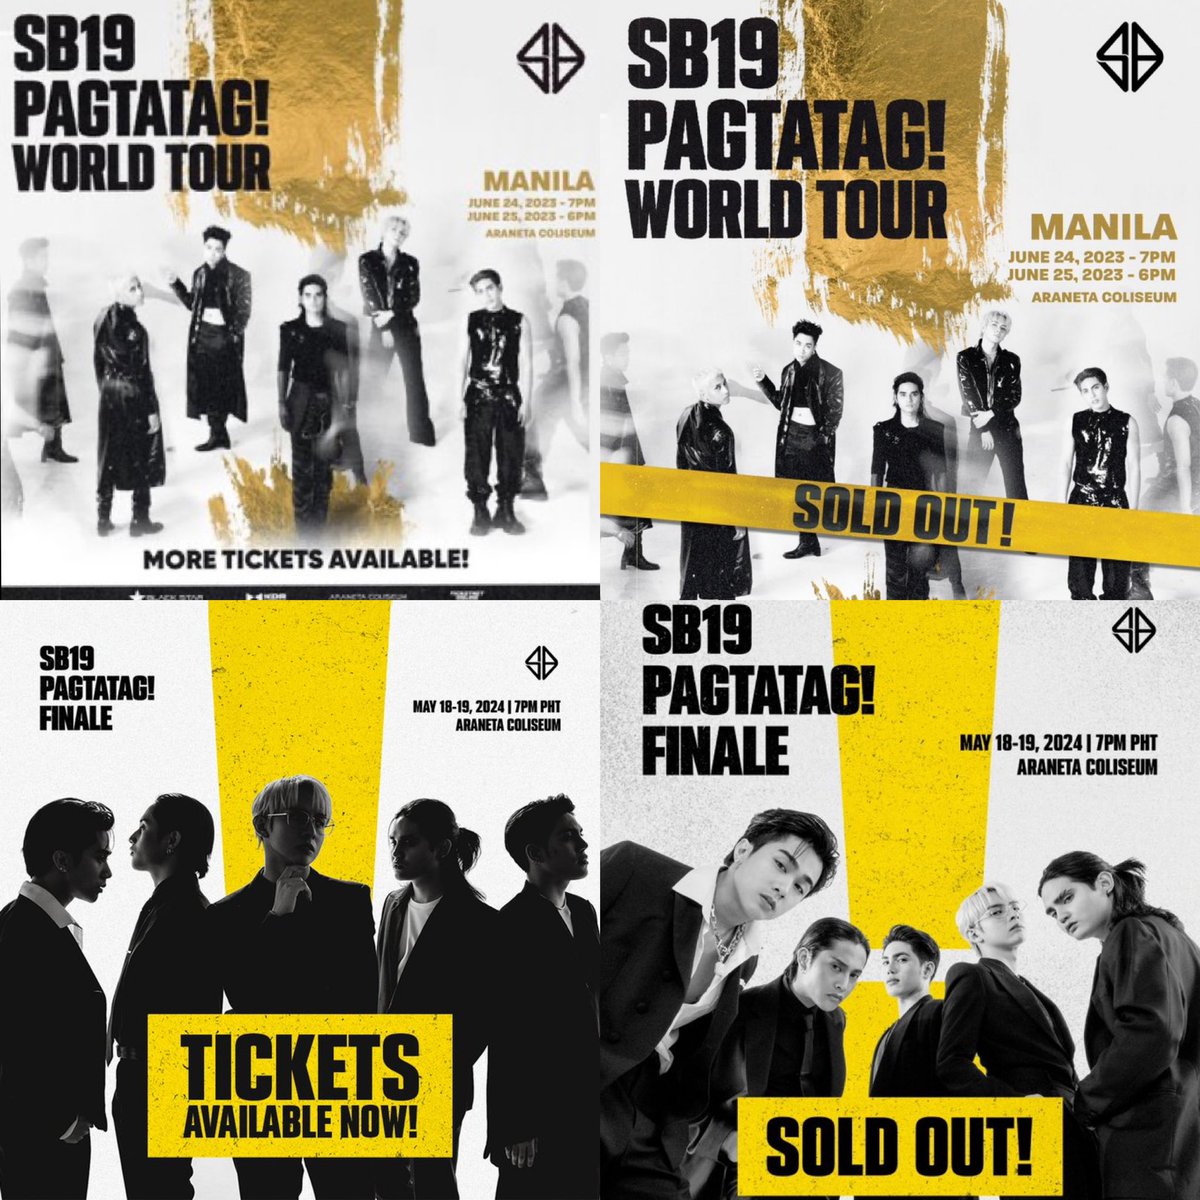 4 freaking MANILA SHOWS for #PAGTATAG and you guys never cease to amaze us with how quickly the tickets sell out 🥹

proud of you five, sobra 💙 see u real soon 🫵🏼

@SB19Official
#SB19 #PAGTATAGFINALE #PAGTATAGFINALESoldOut